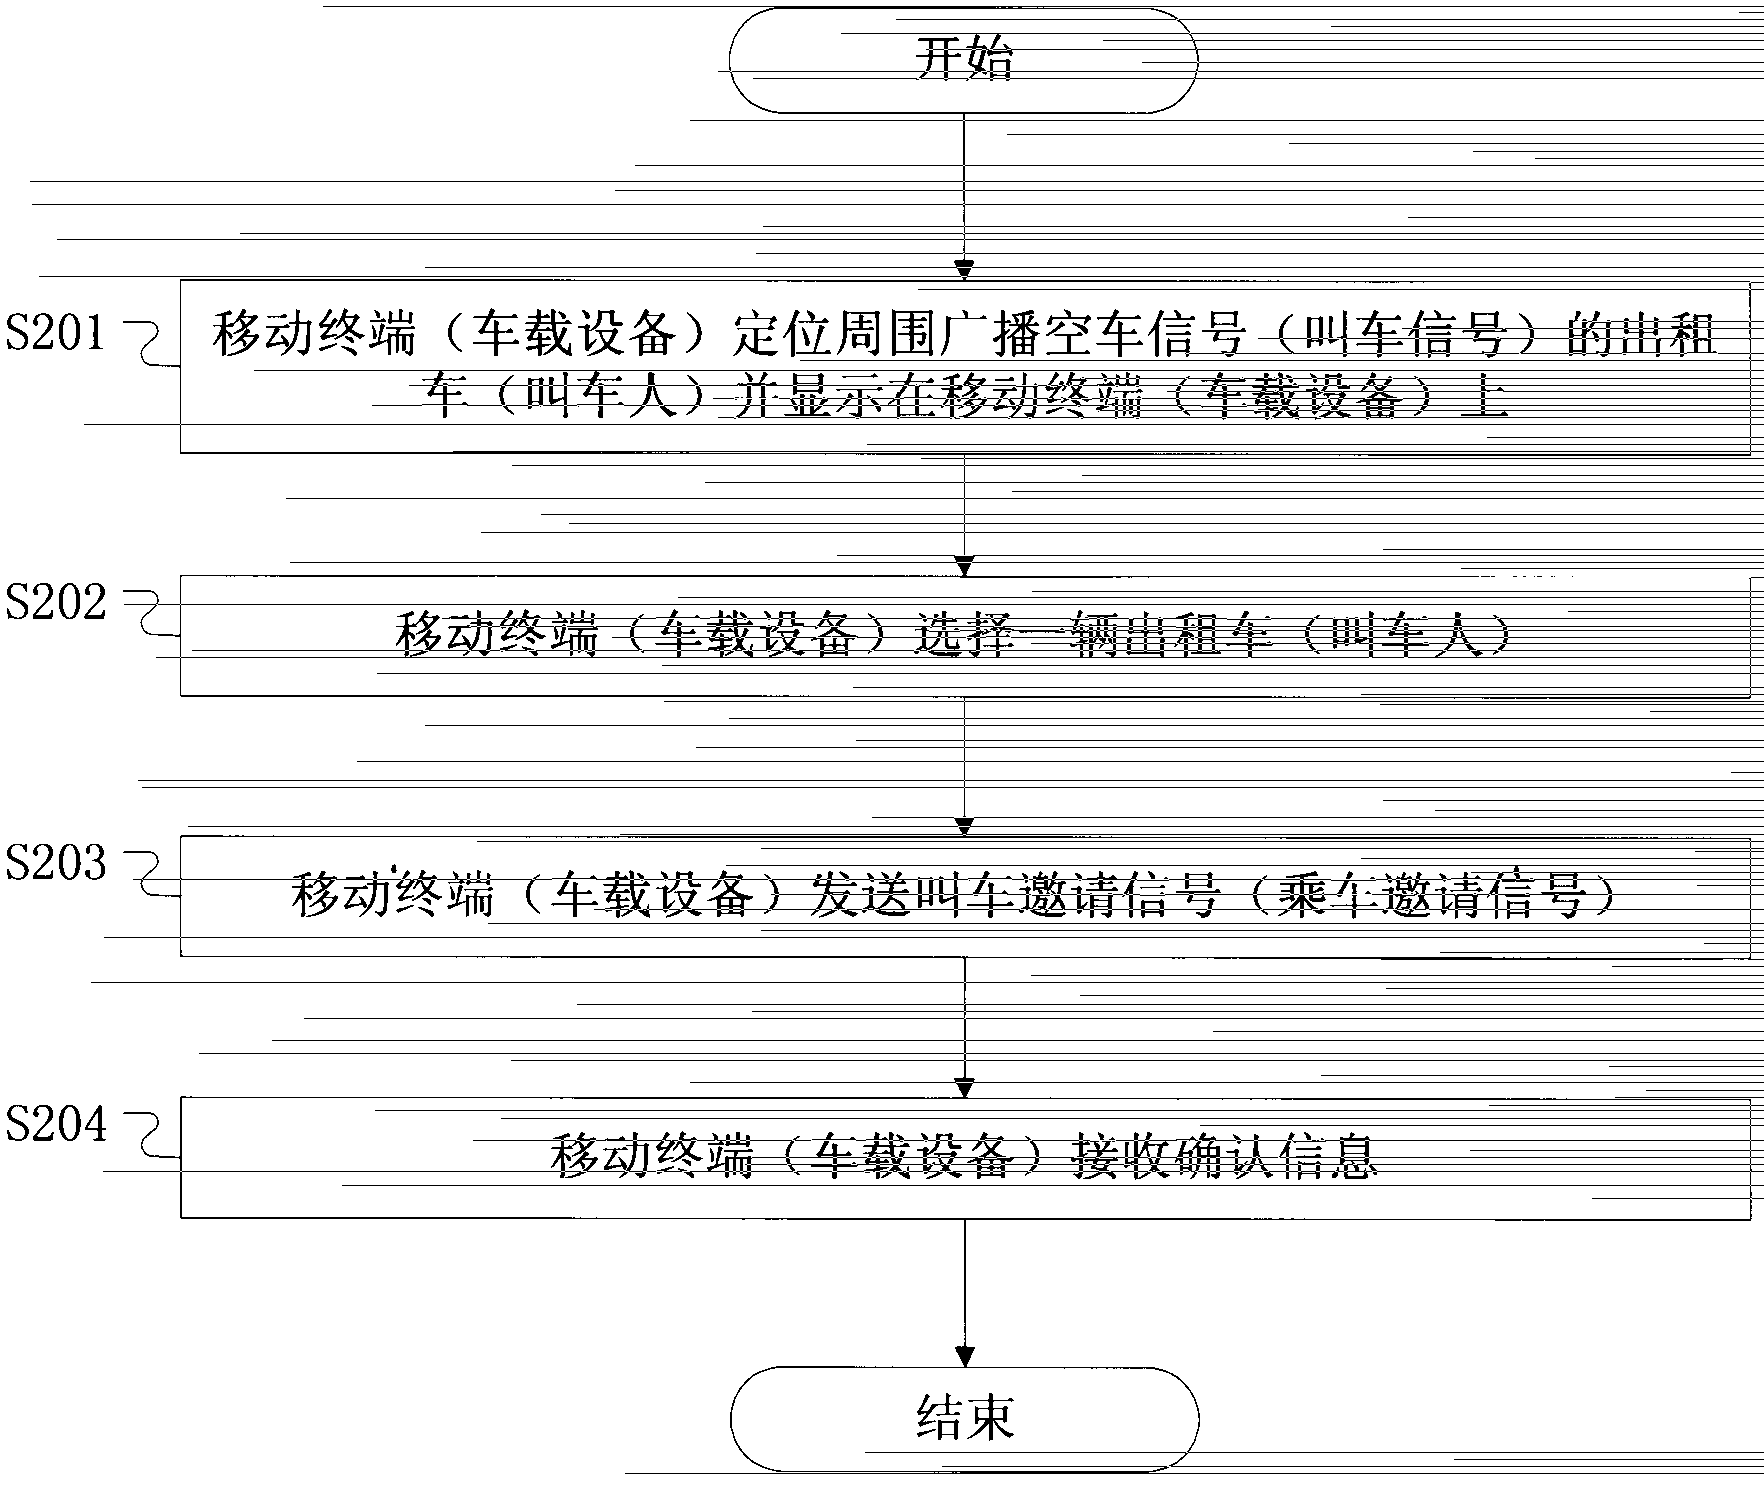 Positioning system based method for self-help taxi calling and logistics application